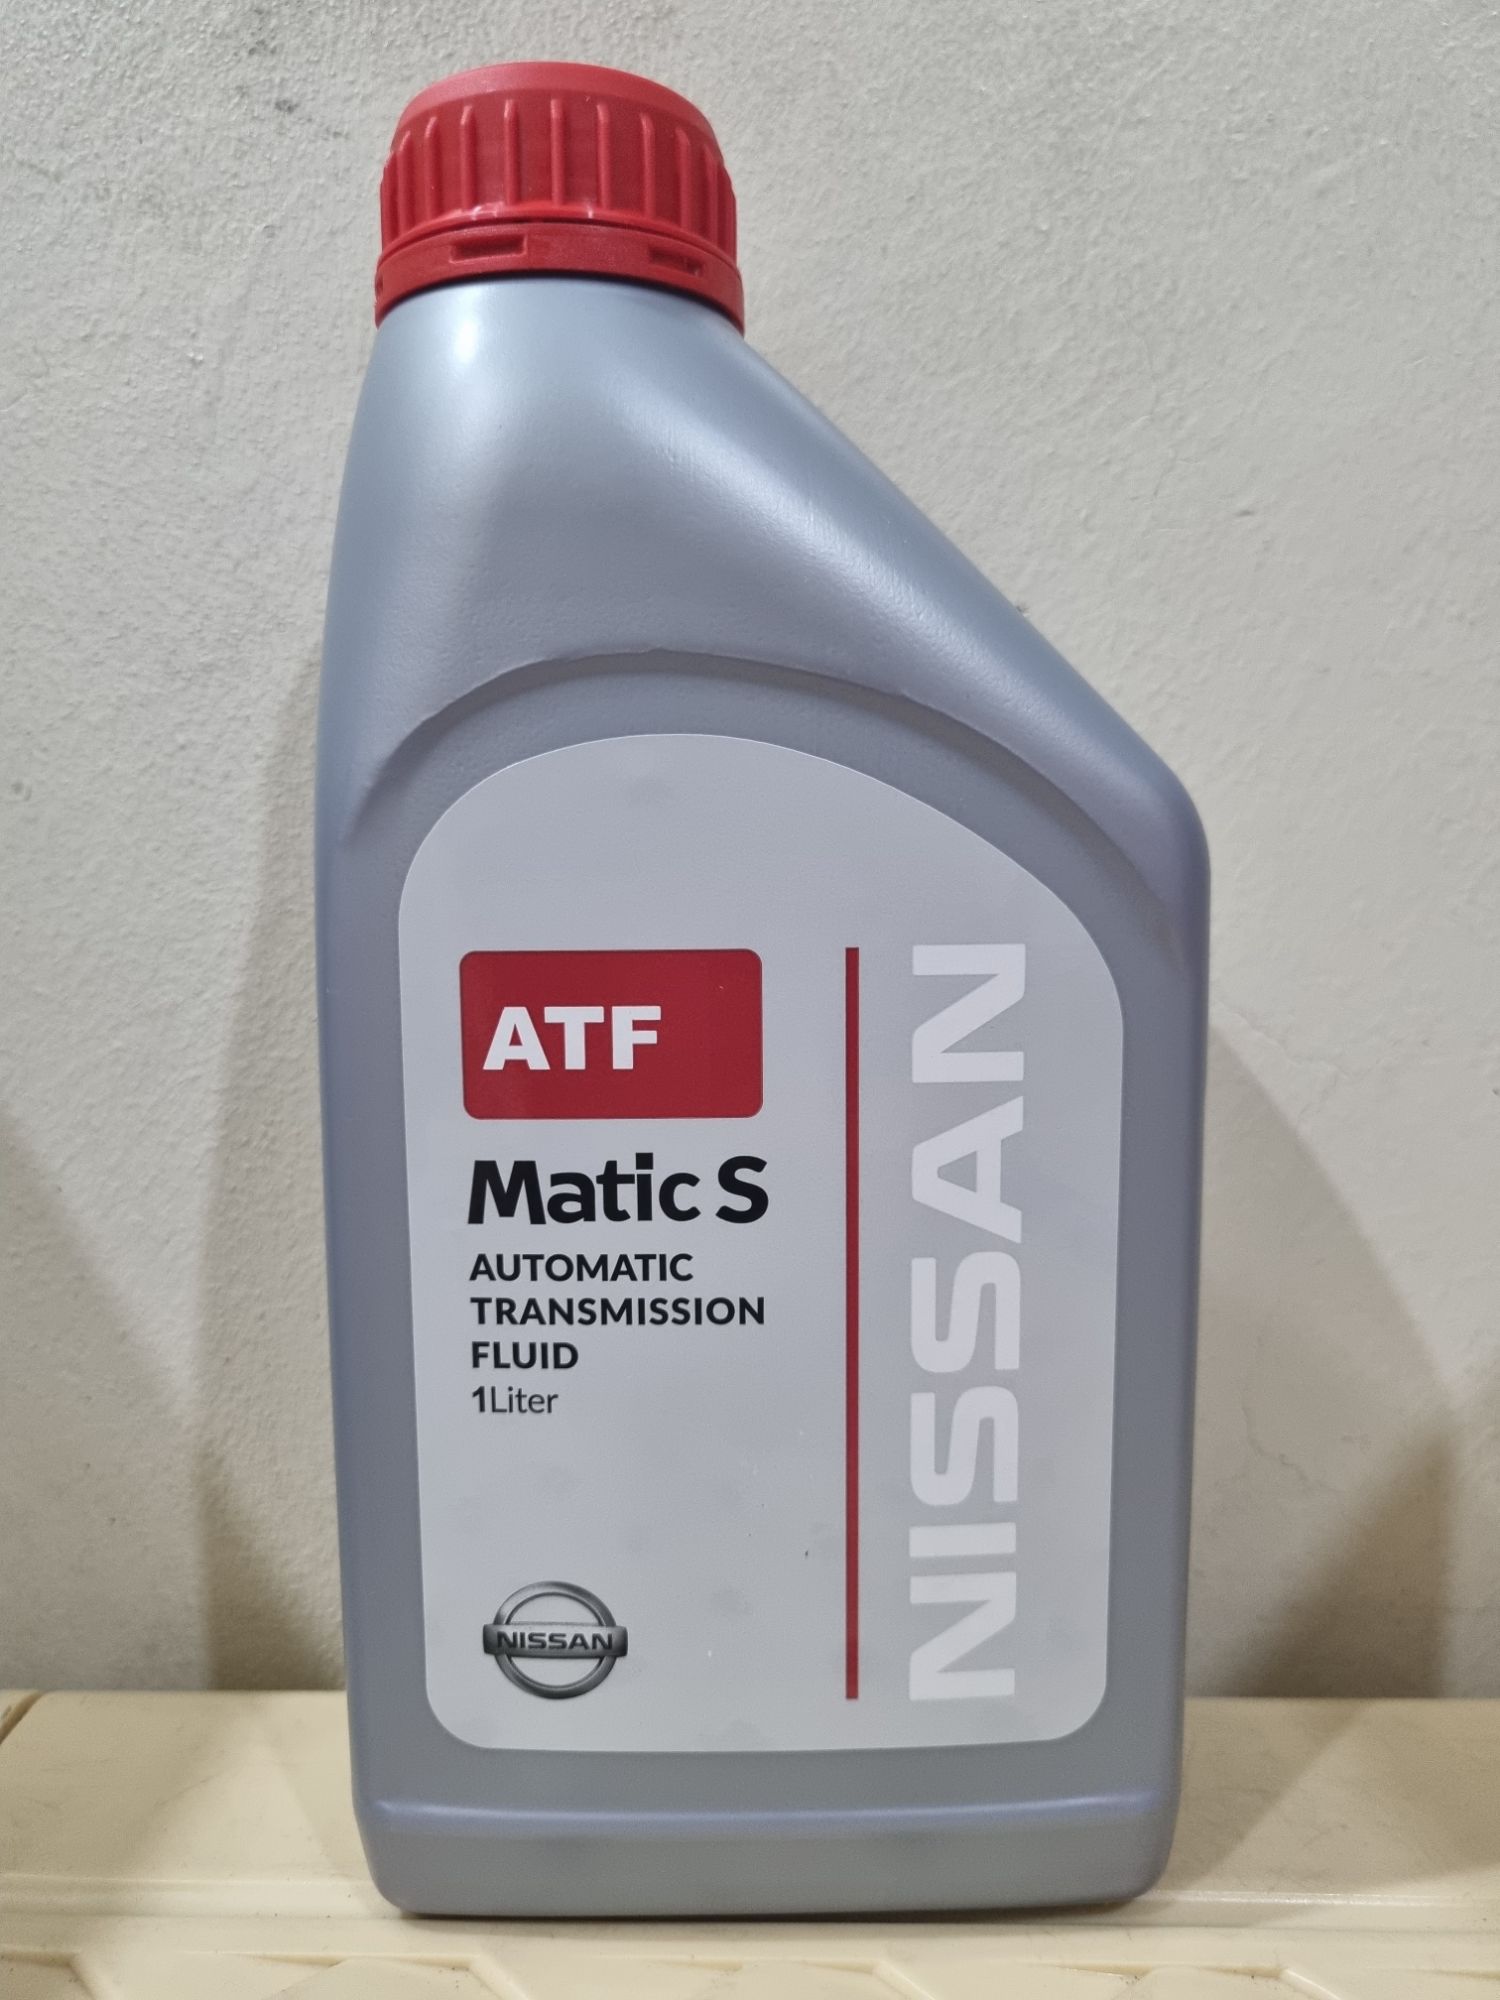 Nissan atf d. Nissan ATF matic-s. Nissan Automatic transmission Fluid matic-s. Ниссан матик j. АКПП Nissan matic d4 масло.